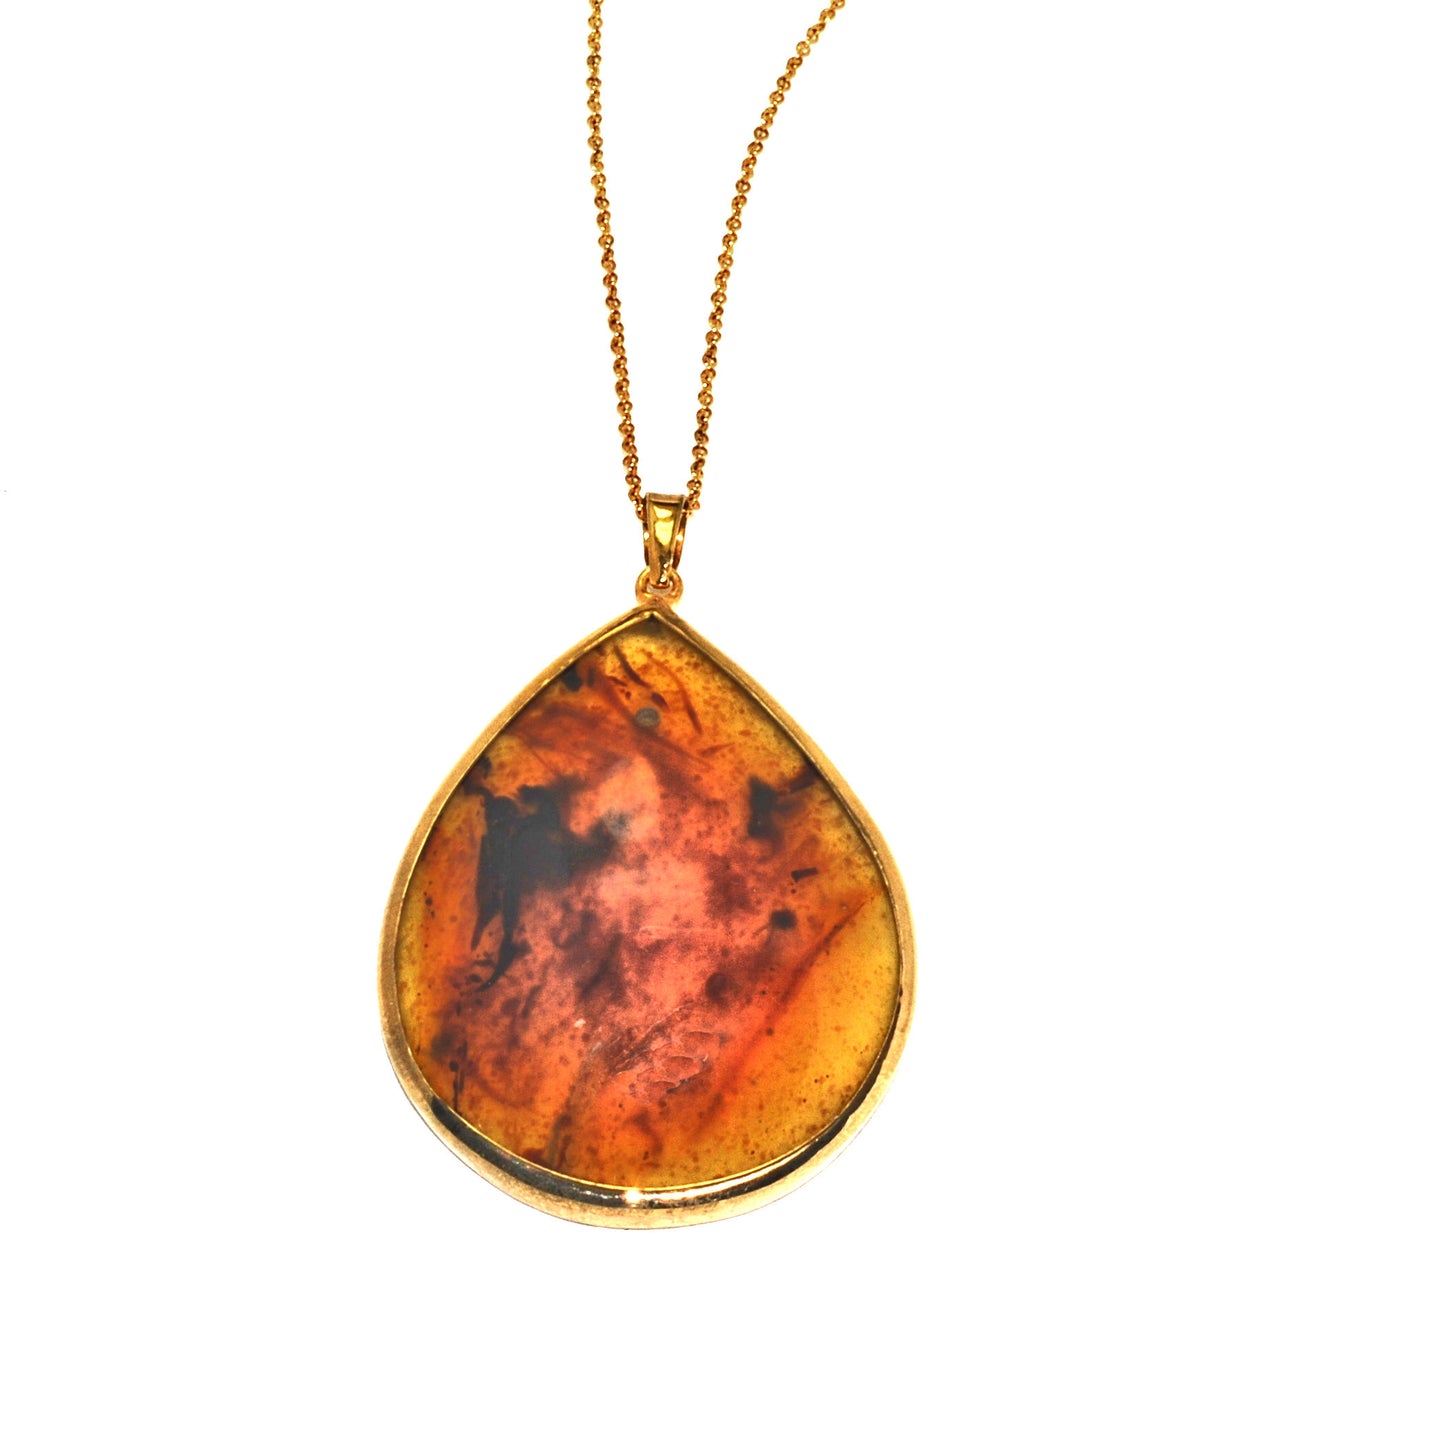 Pear Shaped Amber Necklace